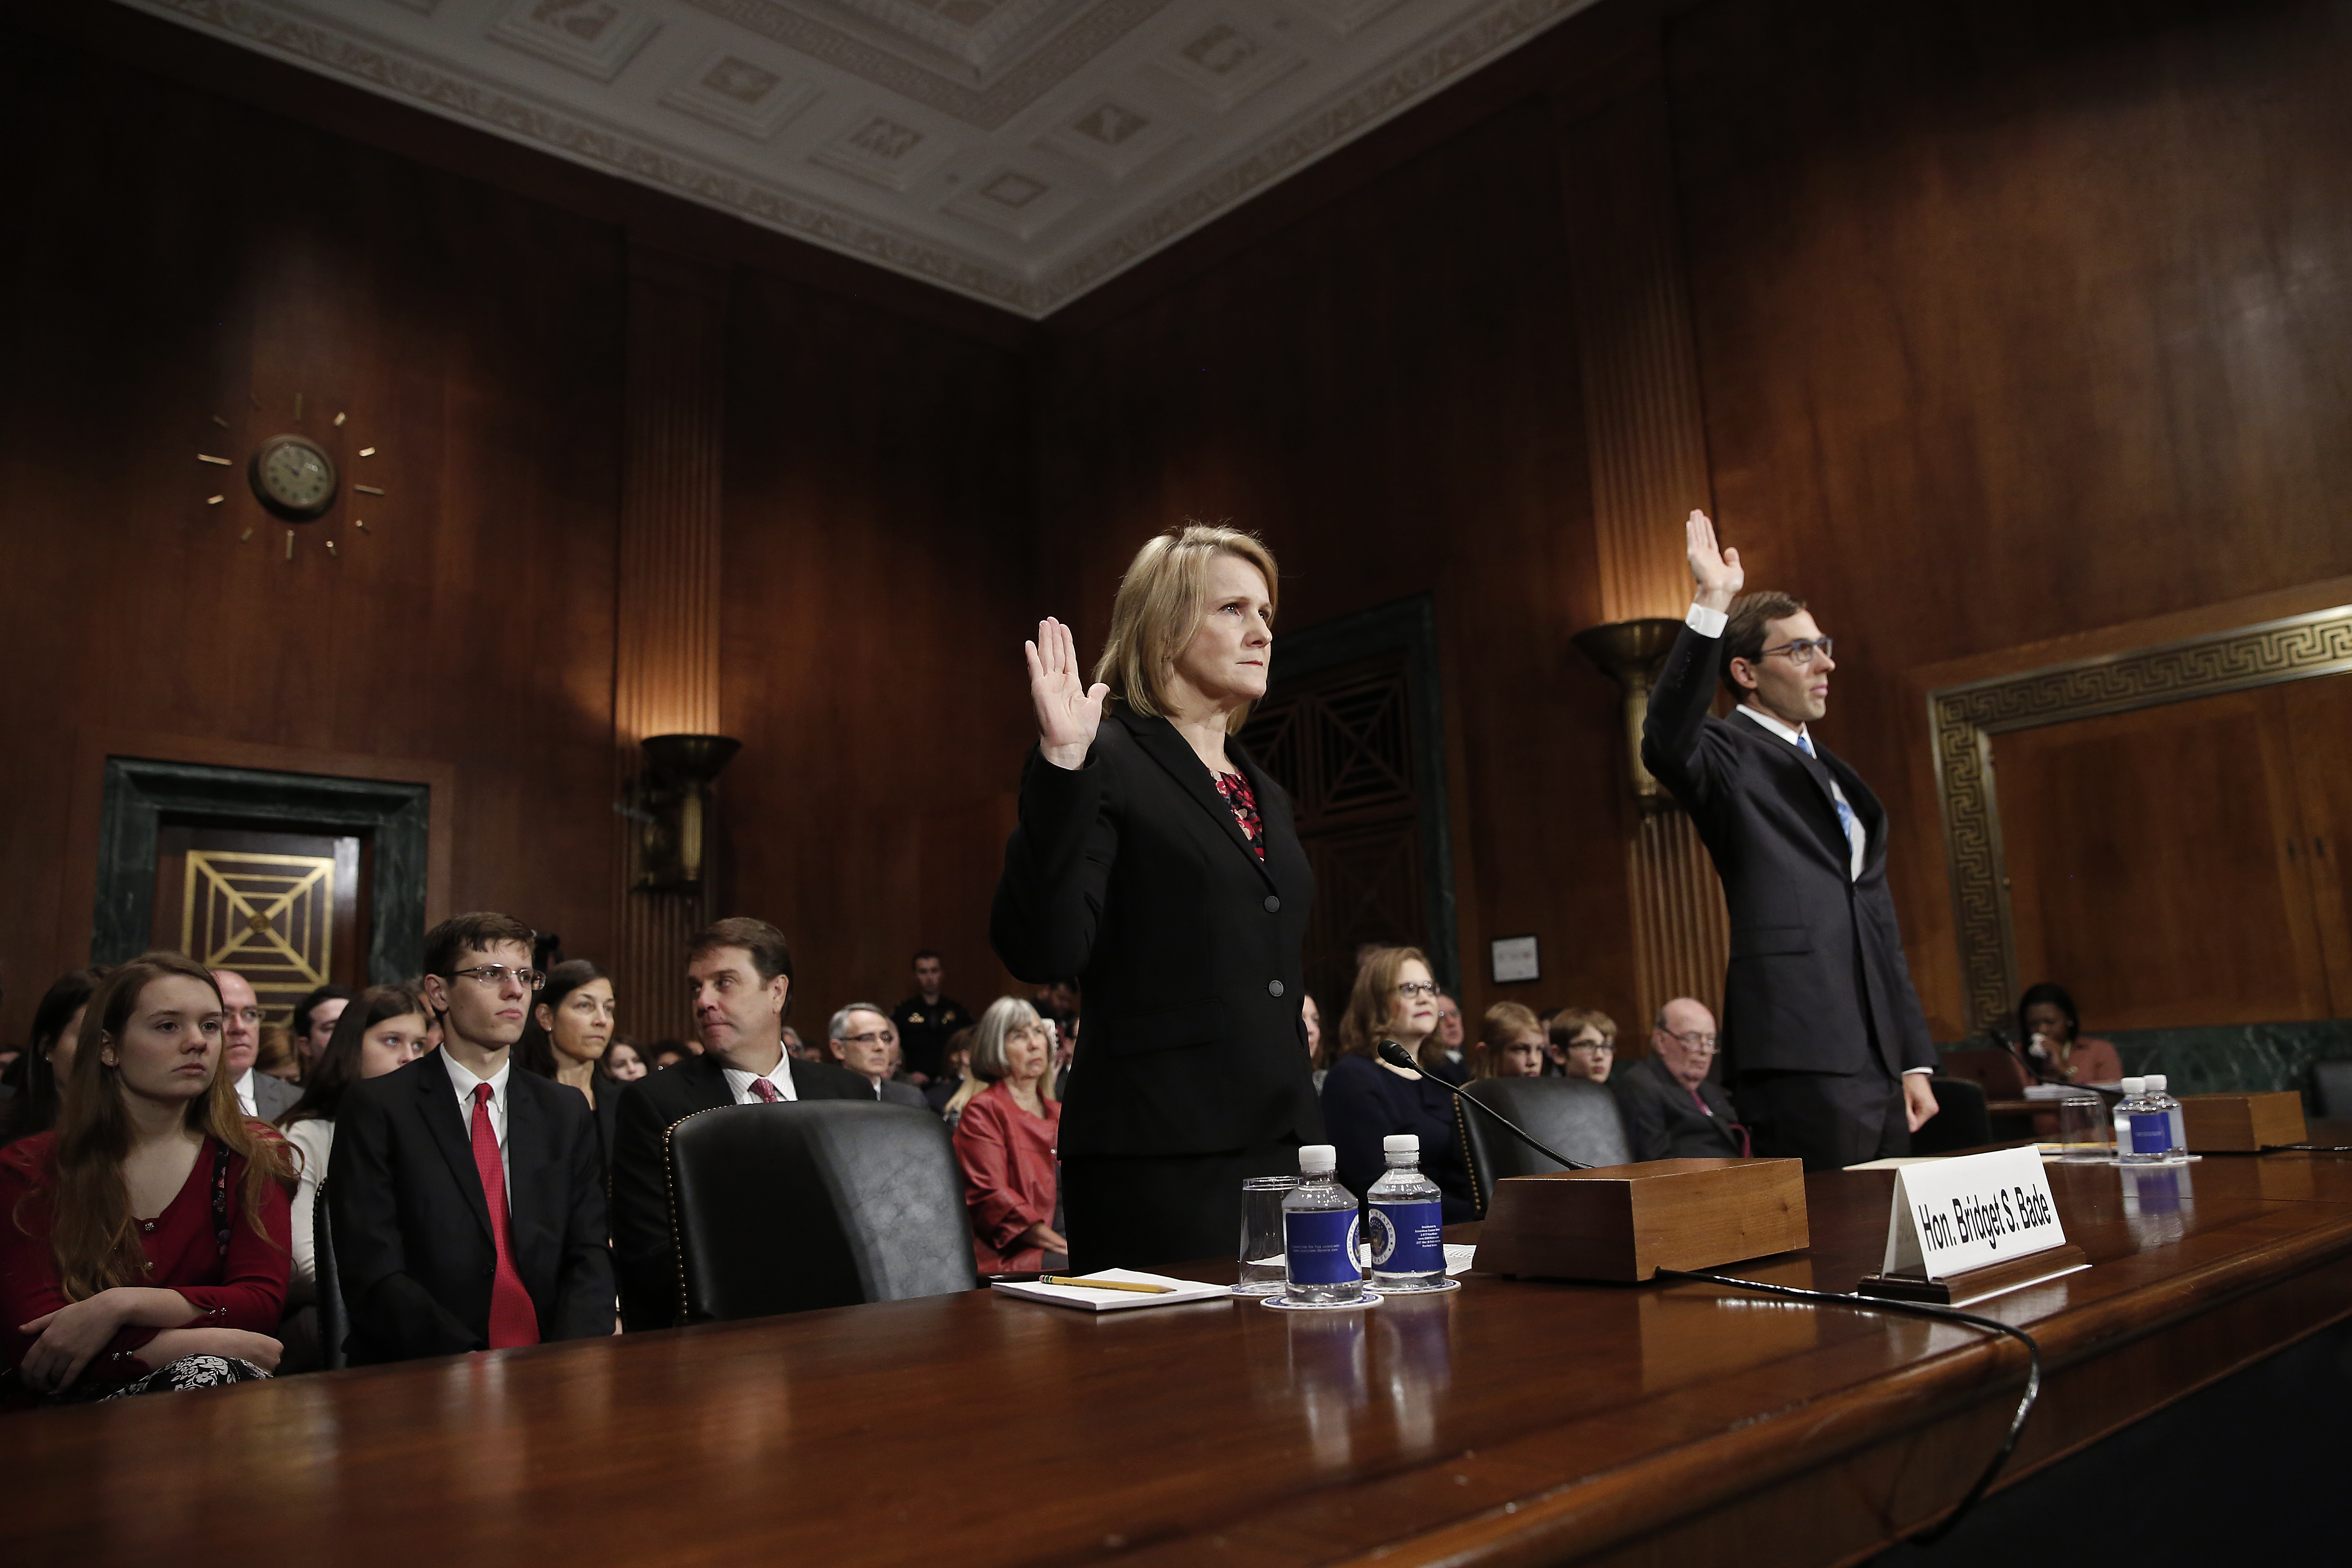 Judges Bridget Bade and Eric Miller appear for their nomination hearing before the Senate Judiciary Committee on October 24, 2018. (Win McNamee/Getty Images)